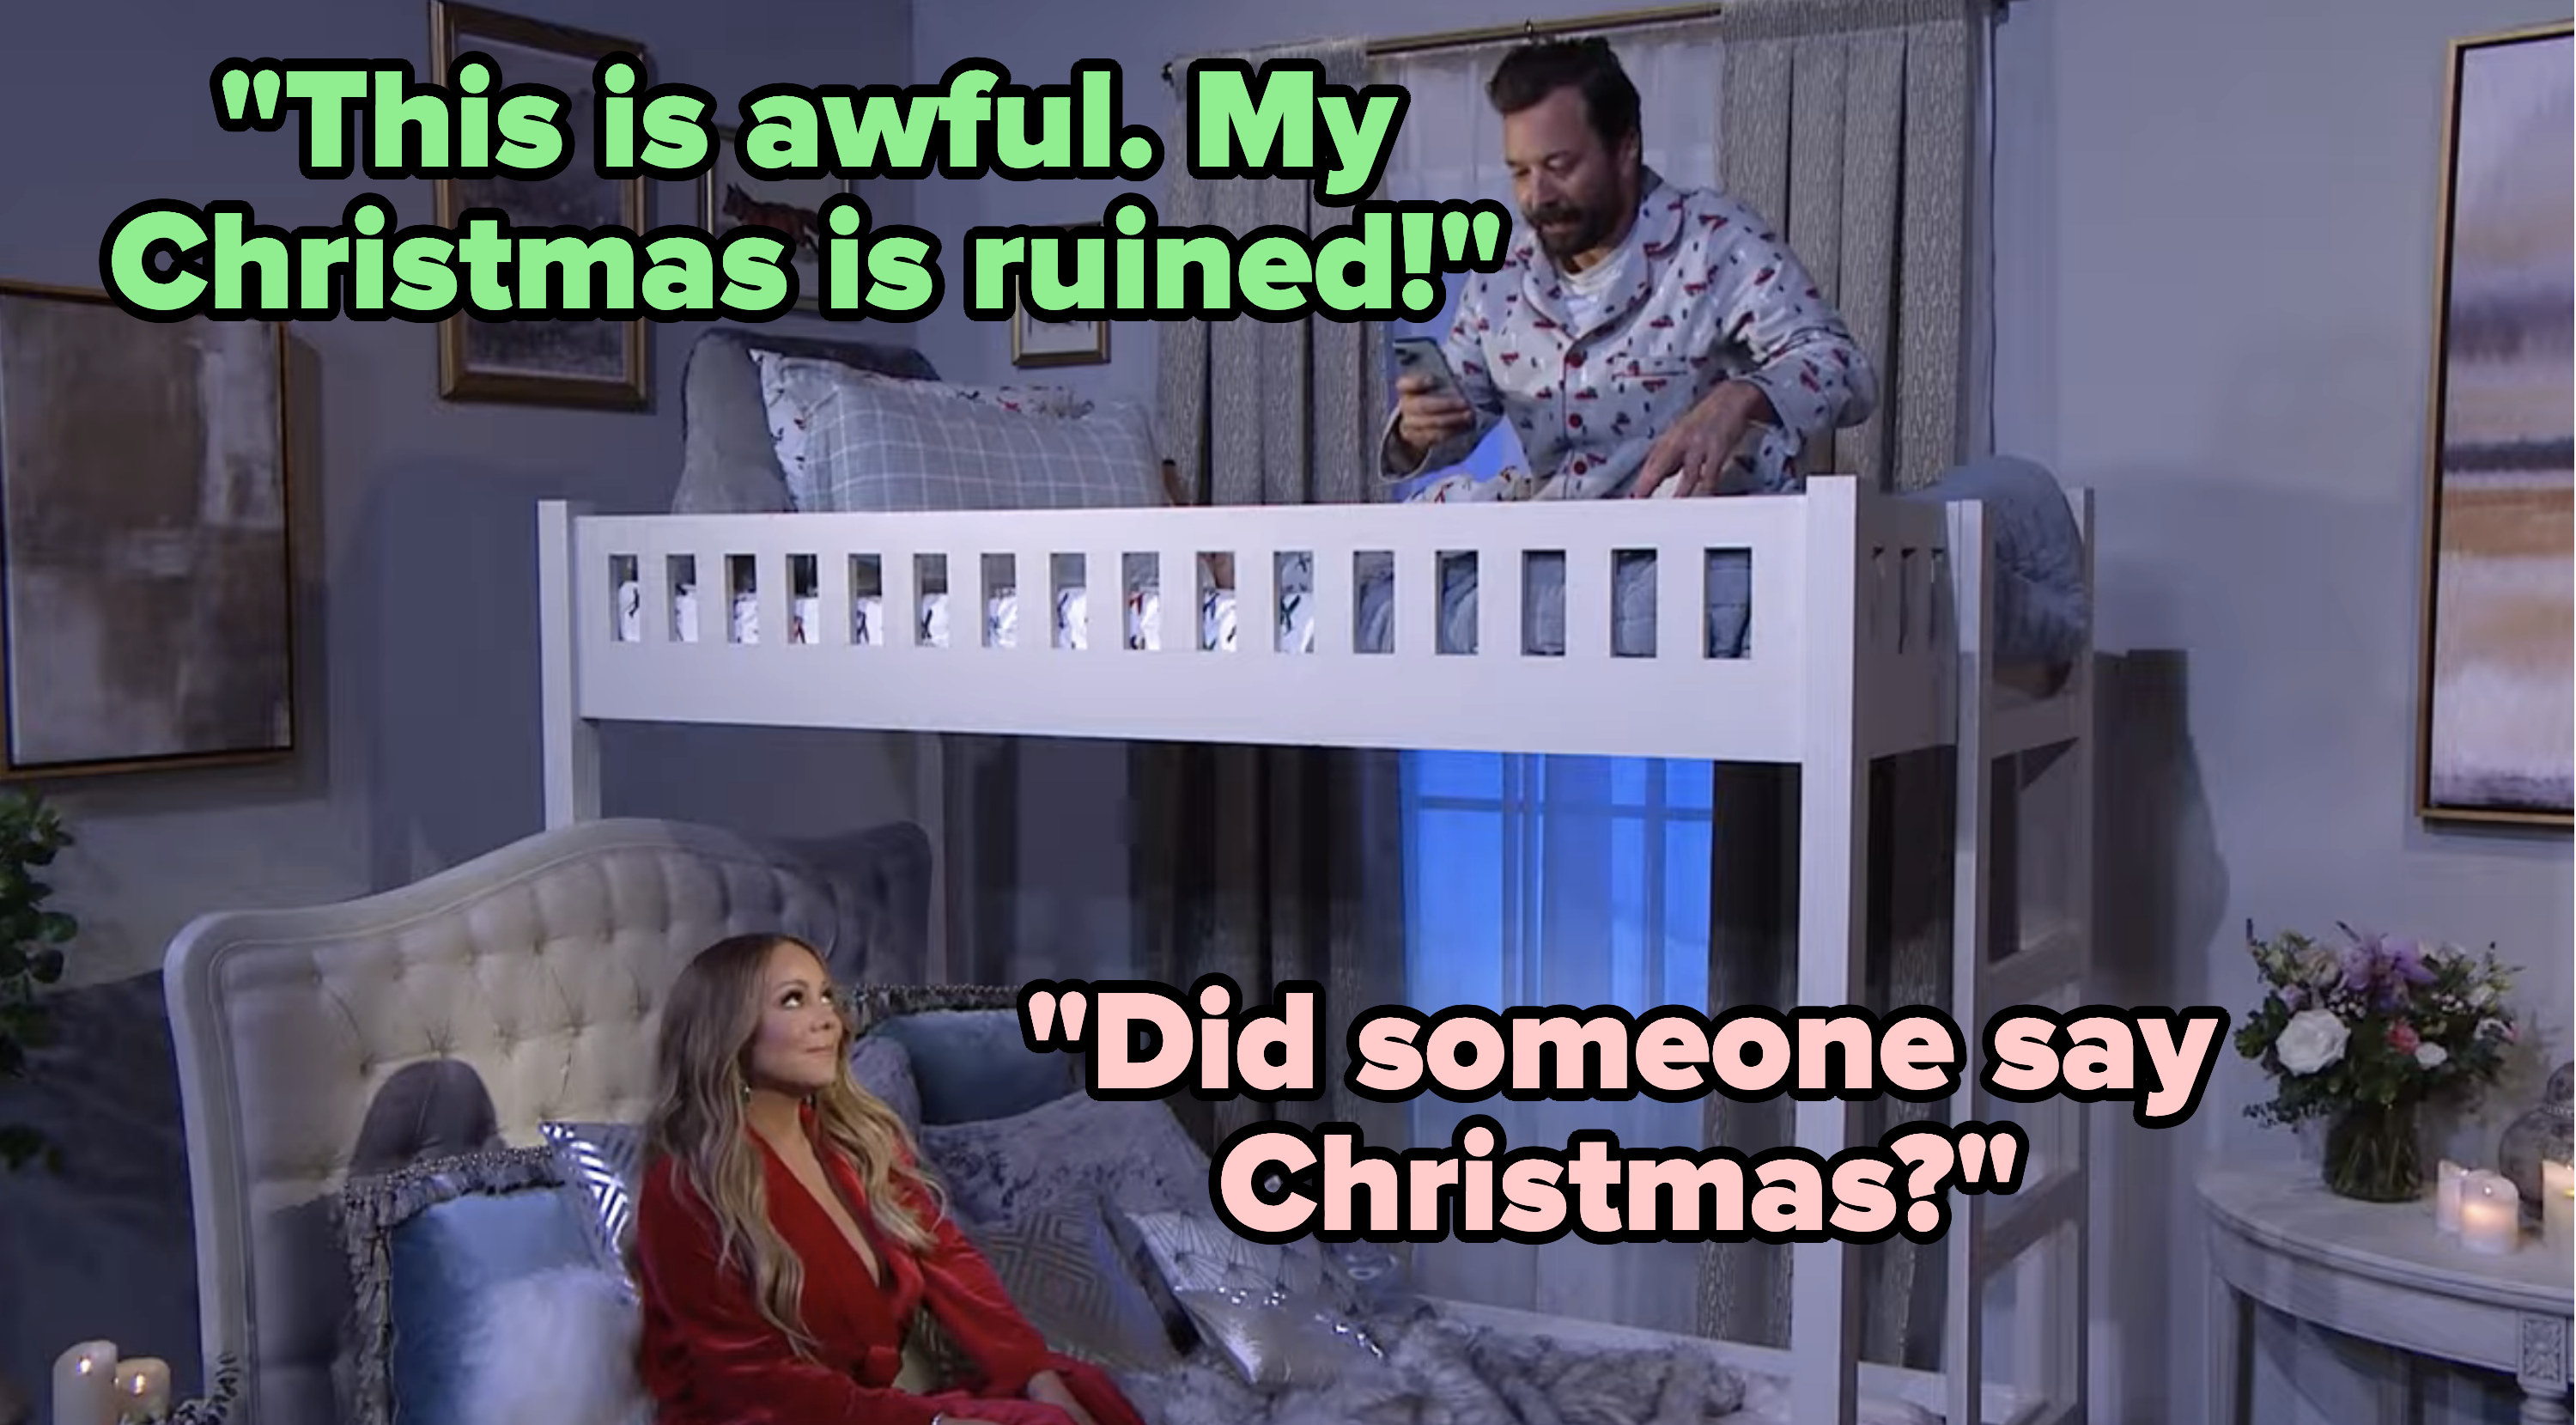 Jimmy and Mariah in bunk beds with Jimmy saying, this is awful my christmas is ruined and mariah responding, did someone say christmas?